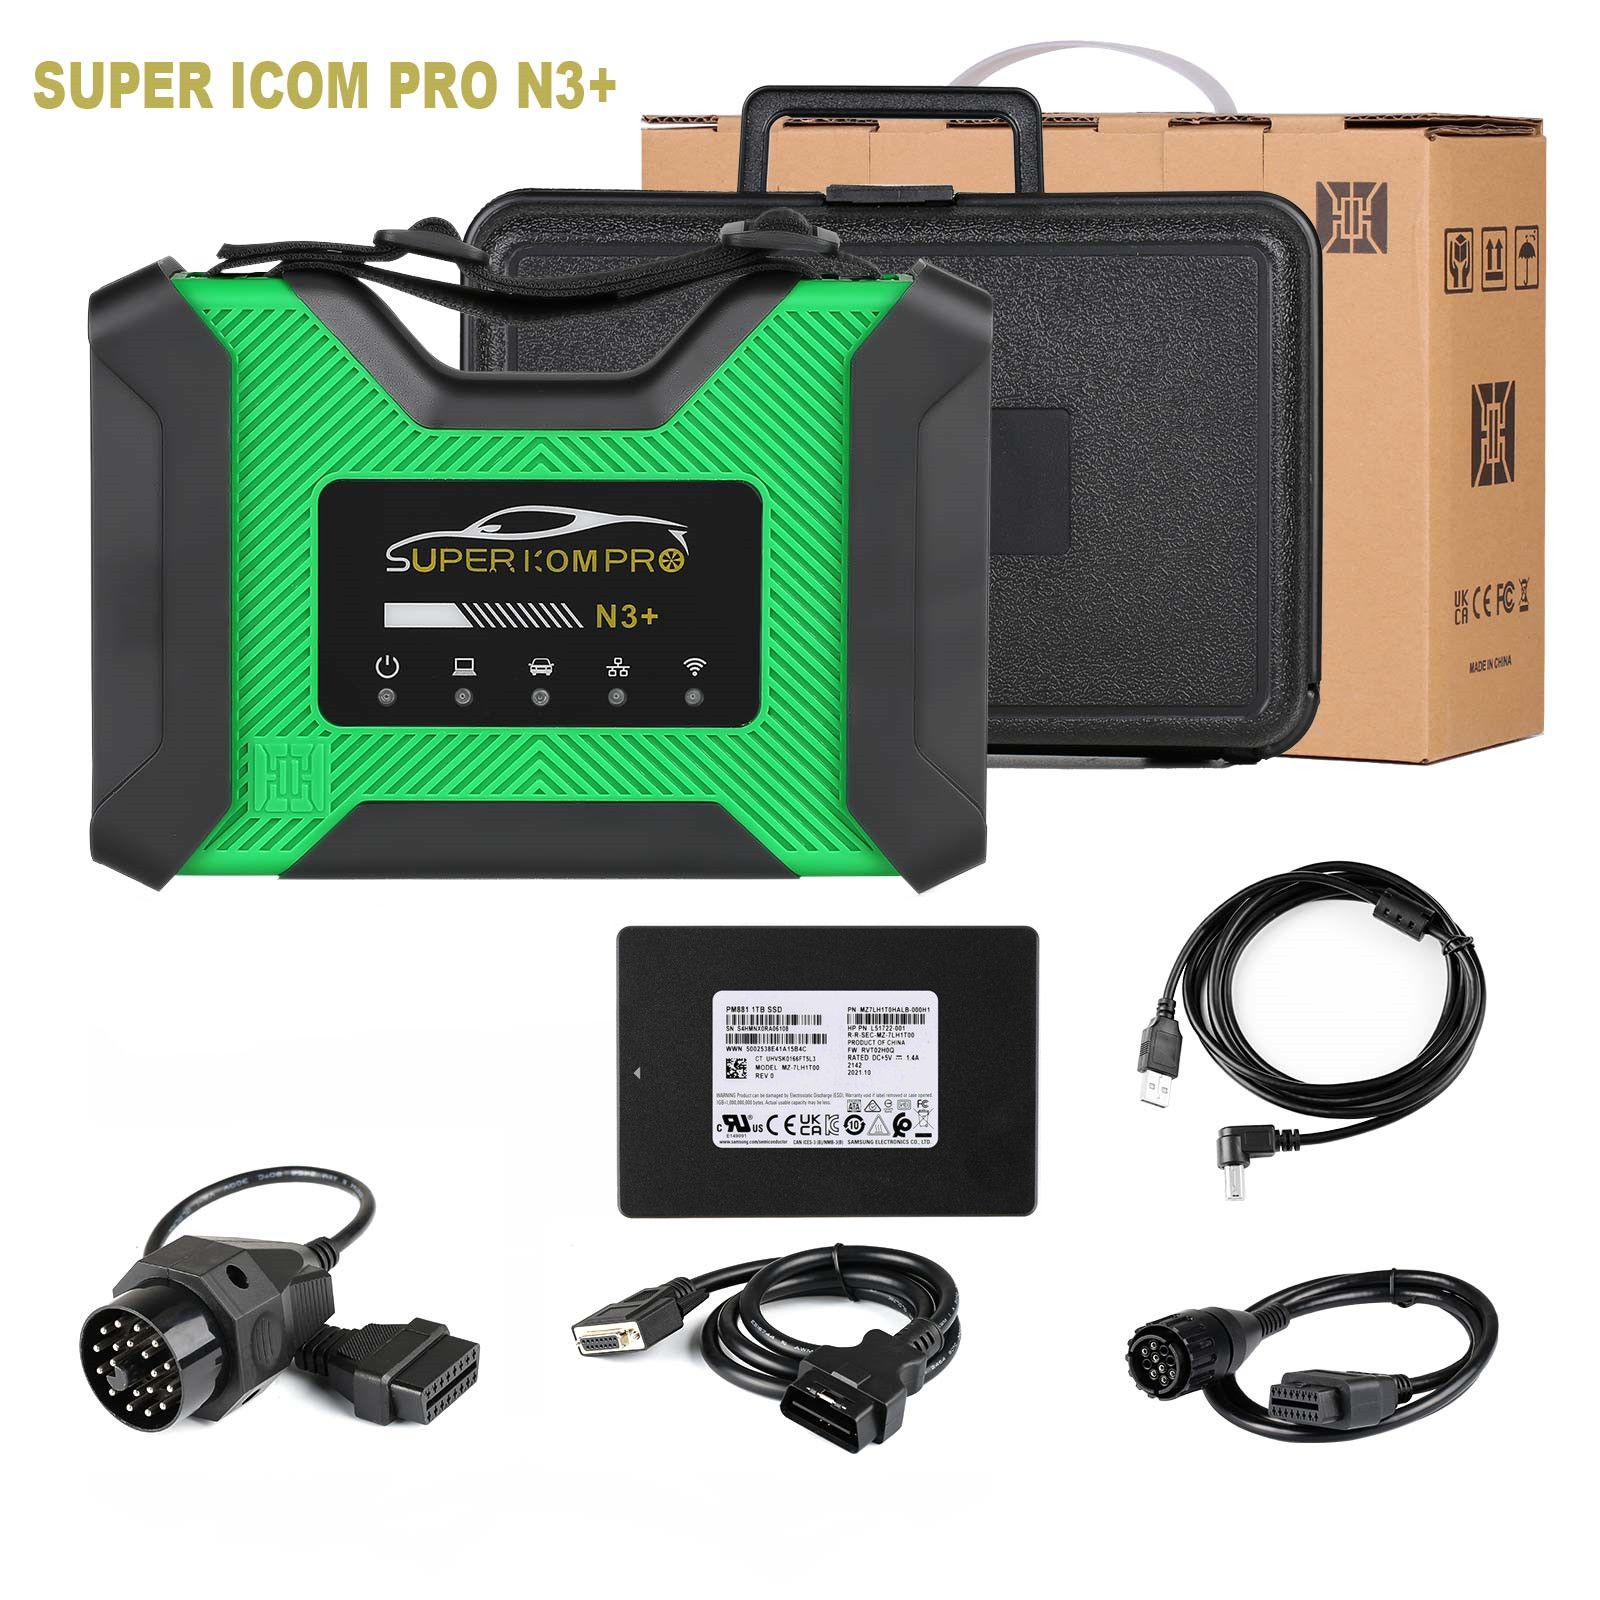 SUPER ICOM PRO N3+ BMW Full Configuration with V2023.6 BMW ICOM Software 1TB SSD ISTA-D 4.41.30 ISTA-P 70.0.200 with Engineers Programming Win10